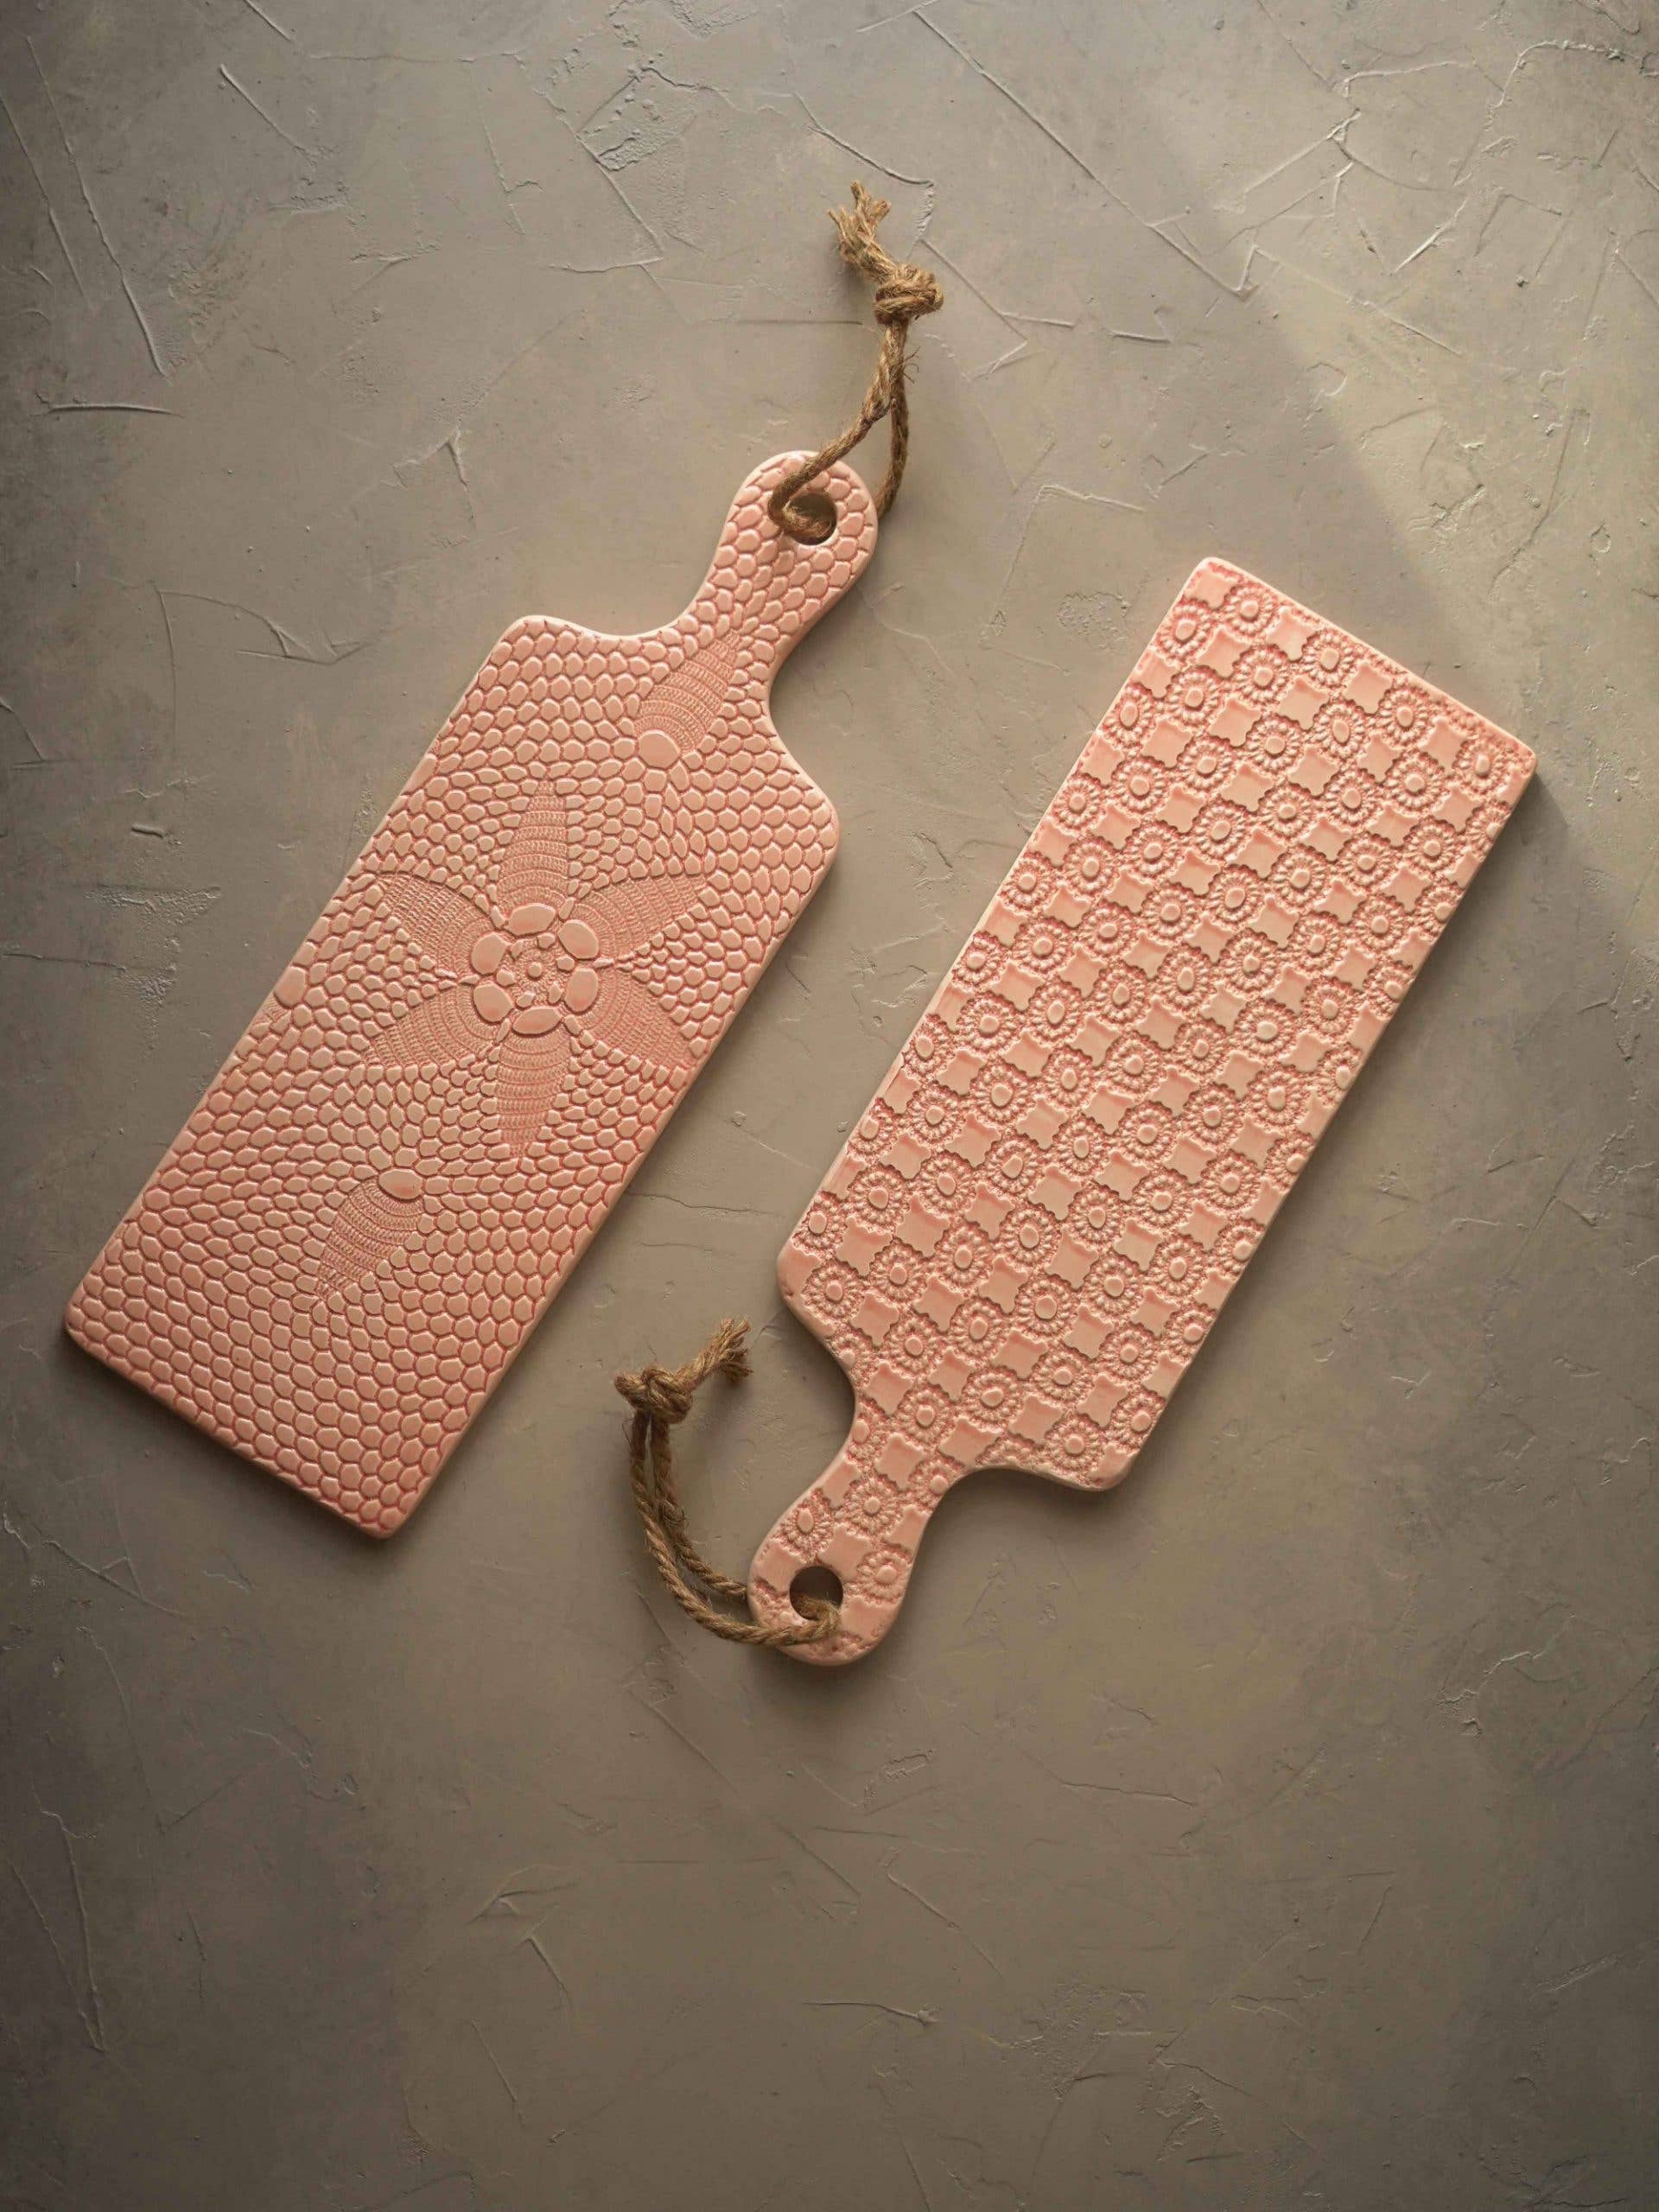 Pink crochet crafted porcelain boards